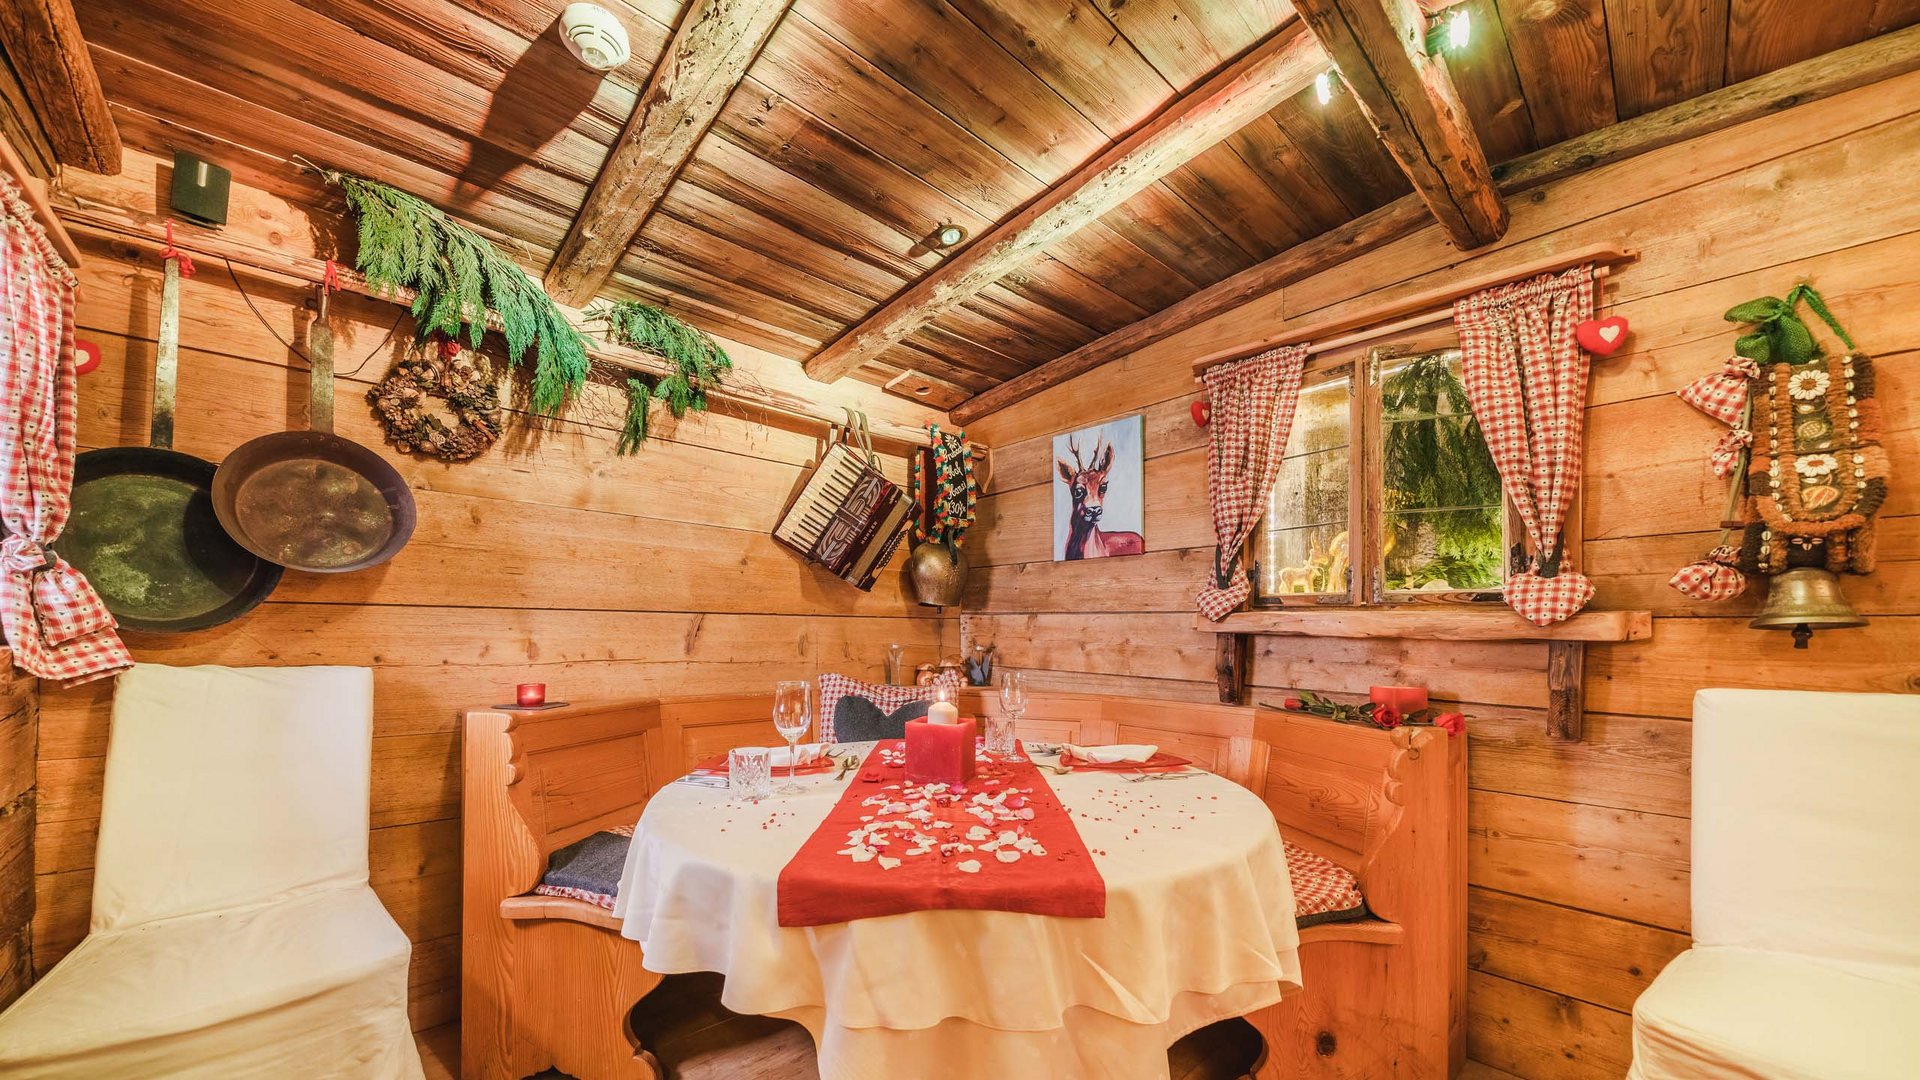 Eating on holiday in Gerlos • Der Grubacher: Eco Hotel in Tyrol